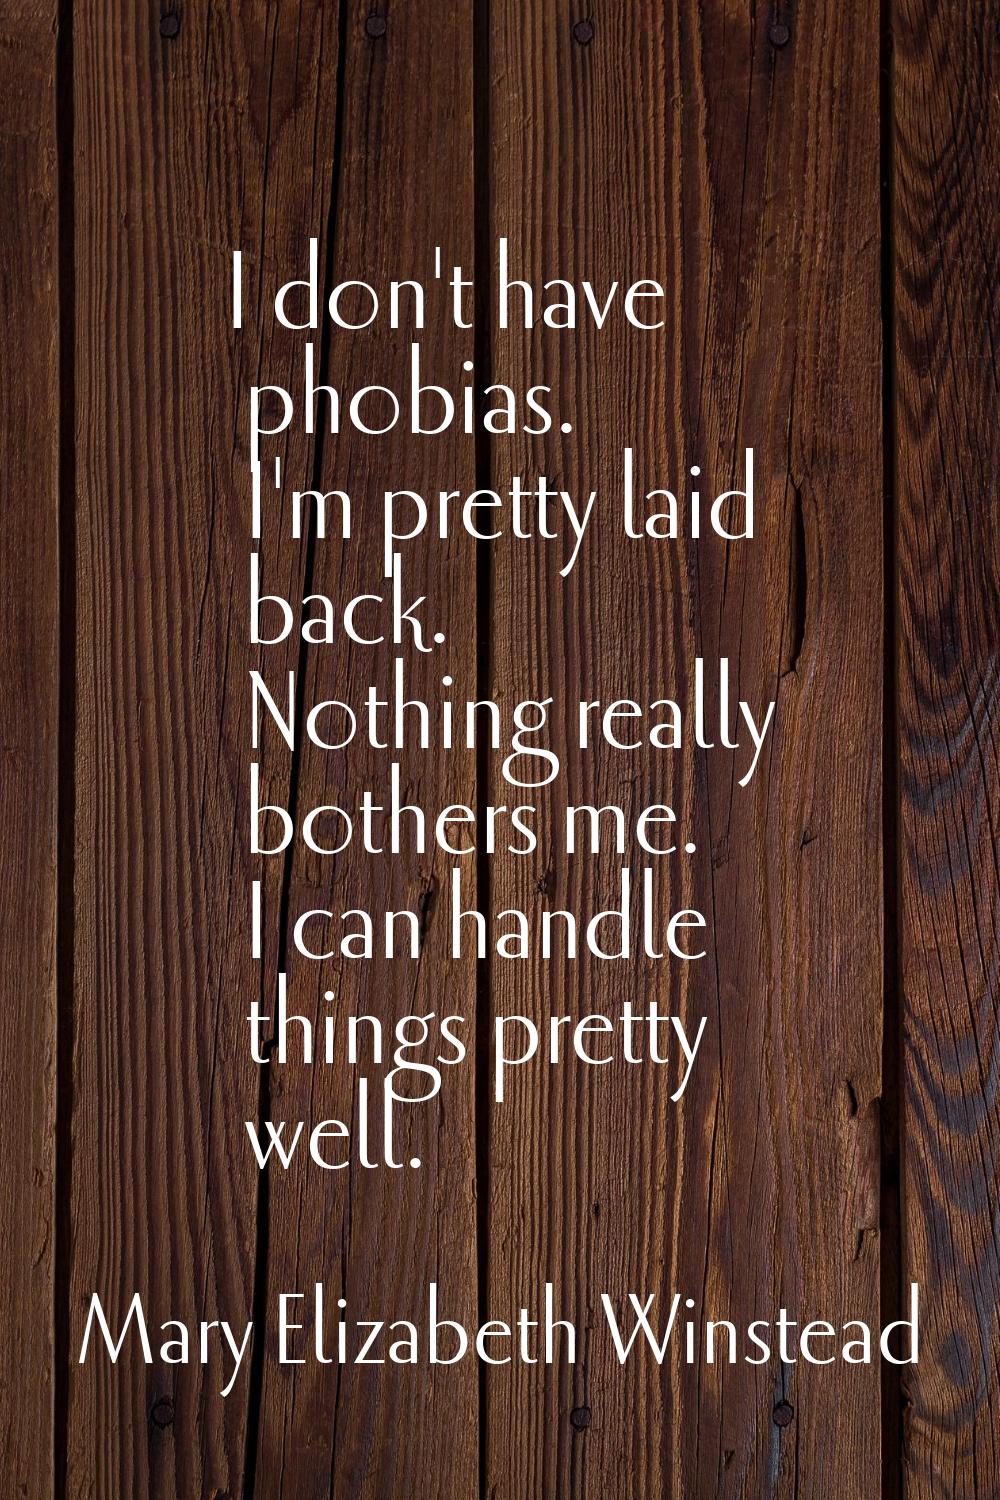 I don't have phobias. I'm pretty laid back. Nothing really bothers me. I can handle things pretty w